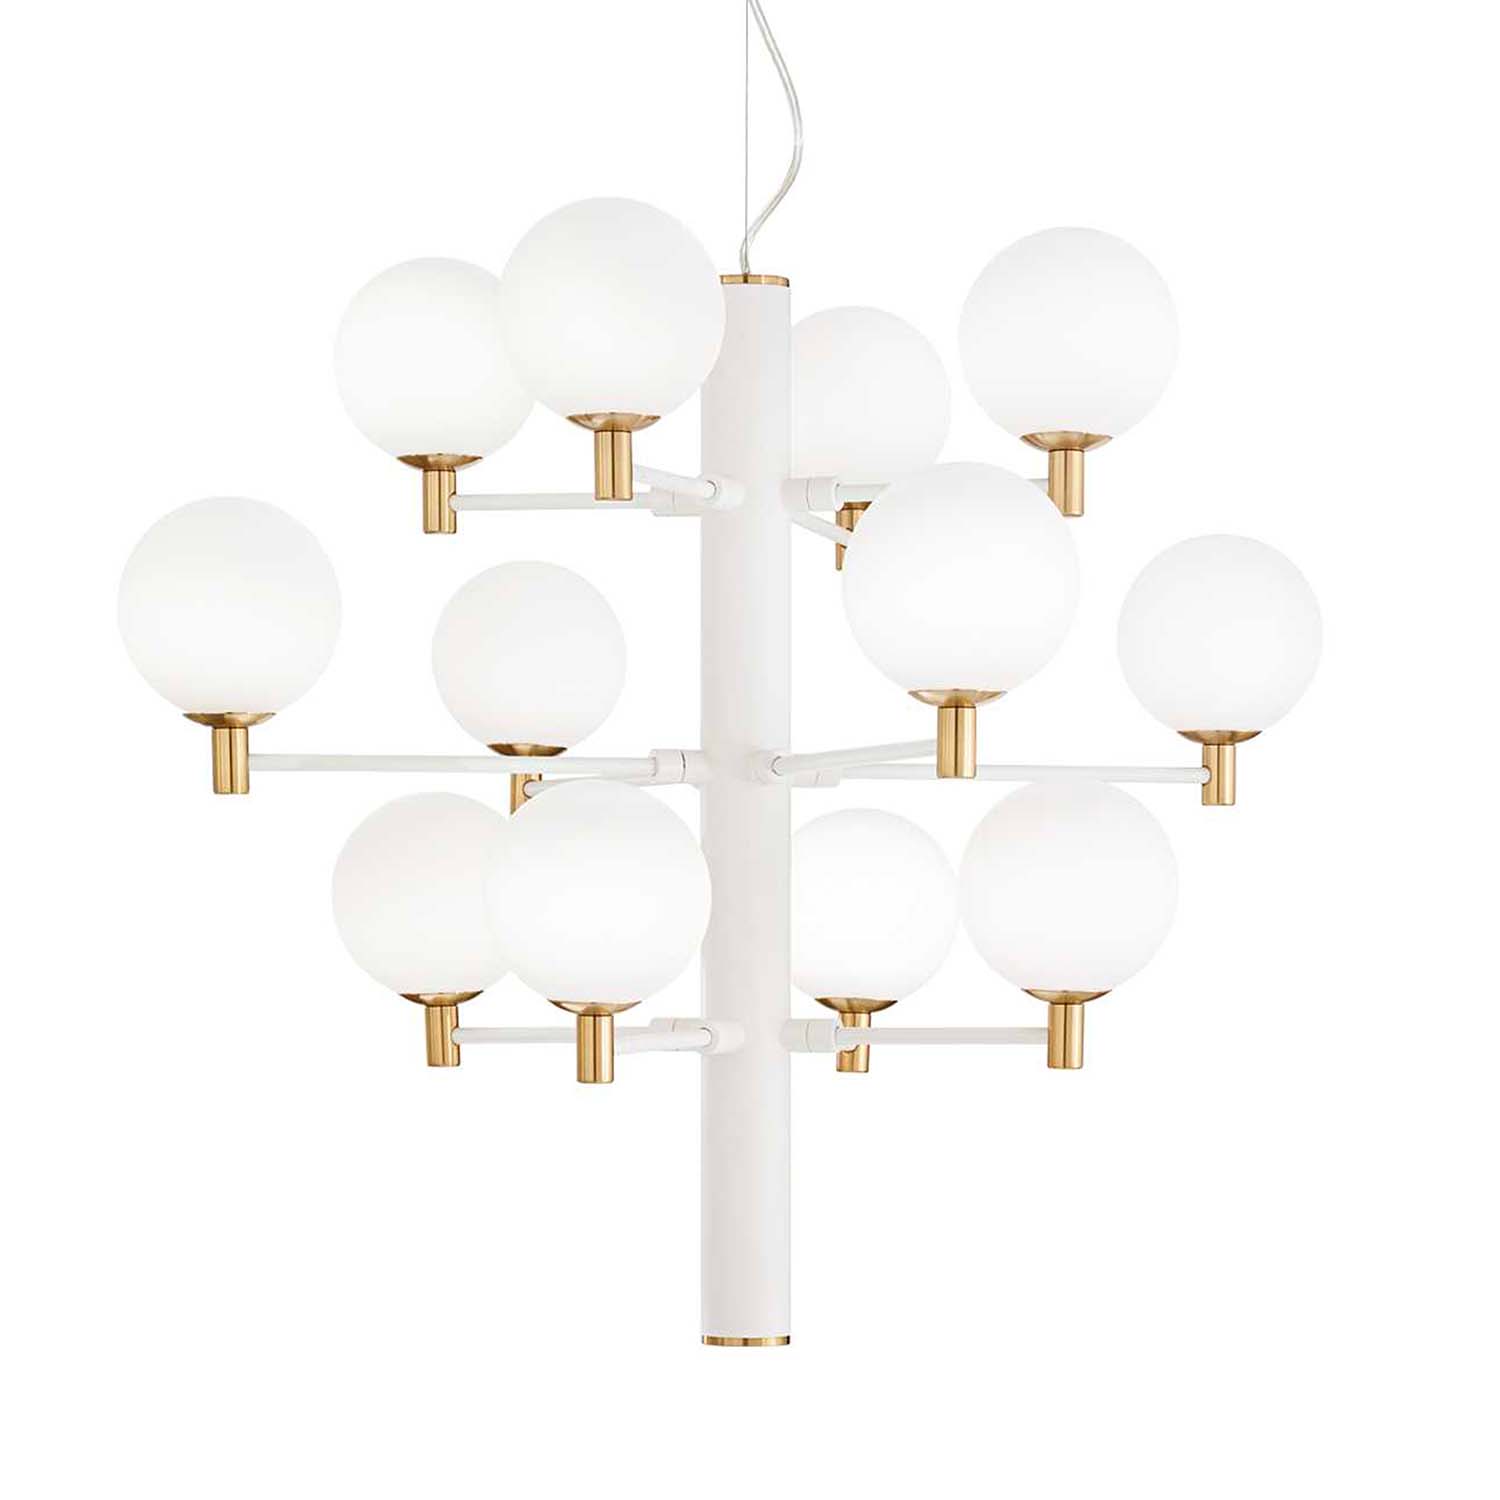 COPERNICO - Large chic and elegant black or white chandelier and glass globes